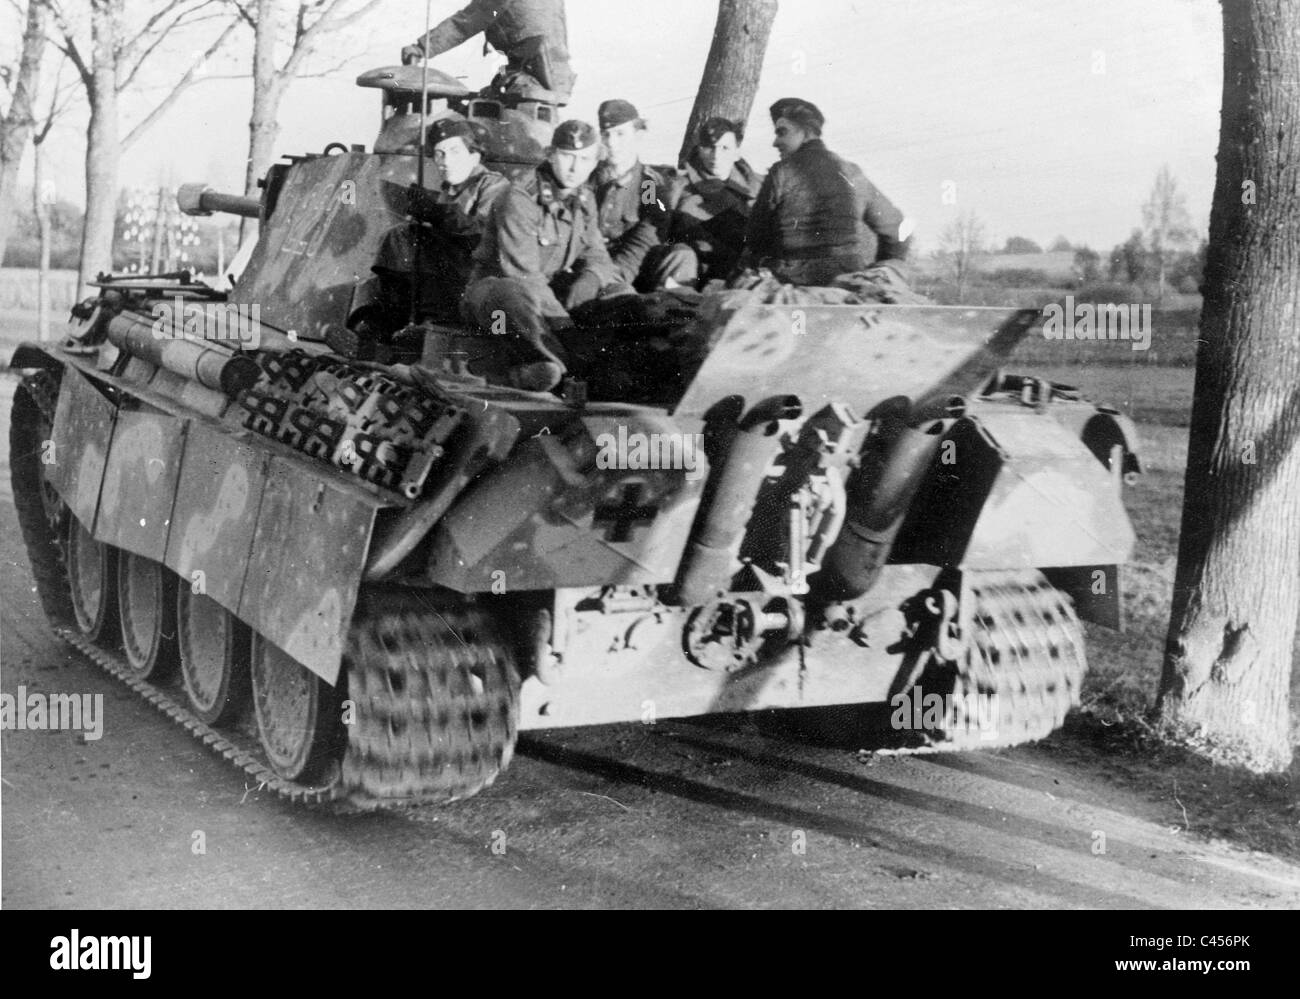 German Panzer V Panther nella Prussia orientale, 1944 Foto Stock